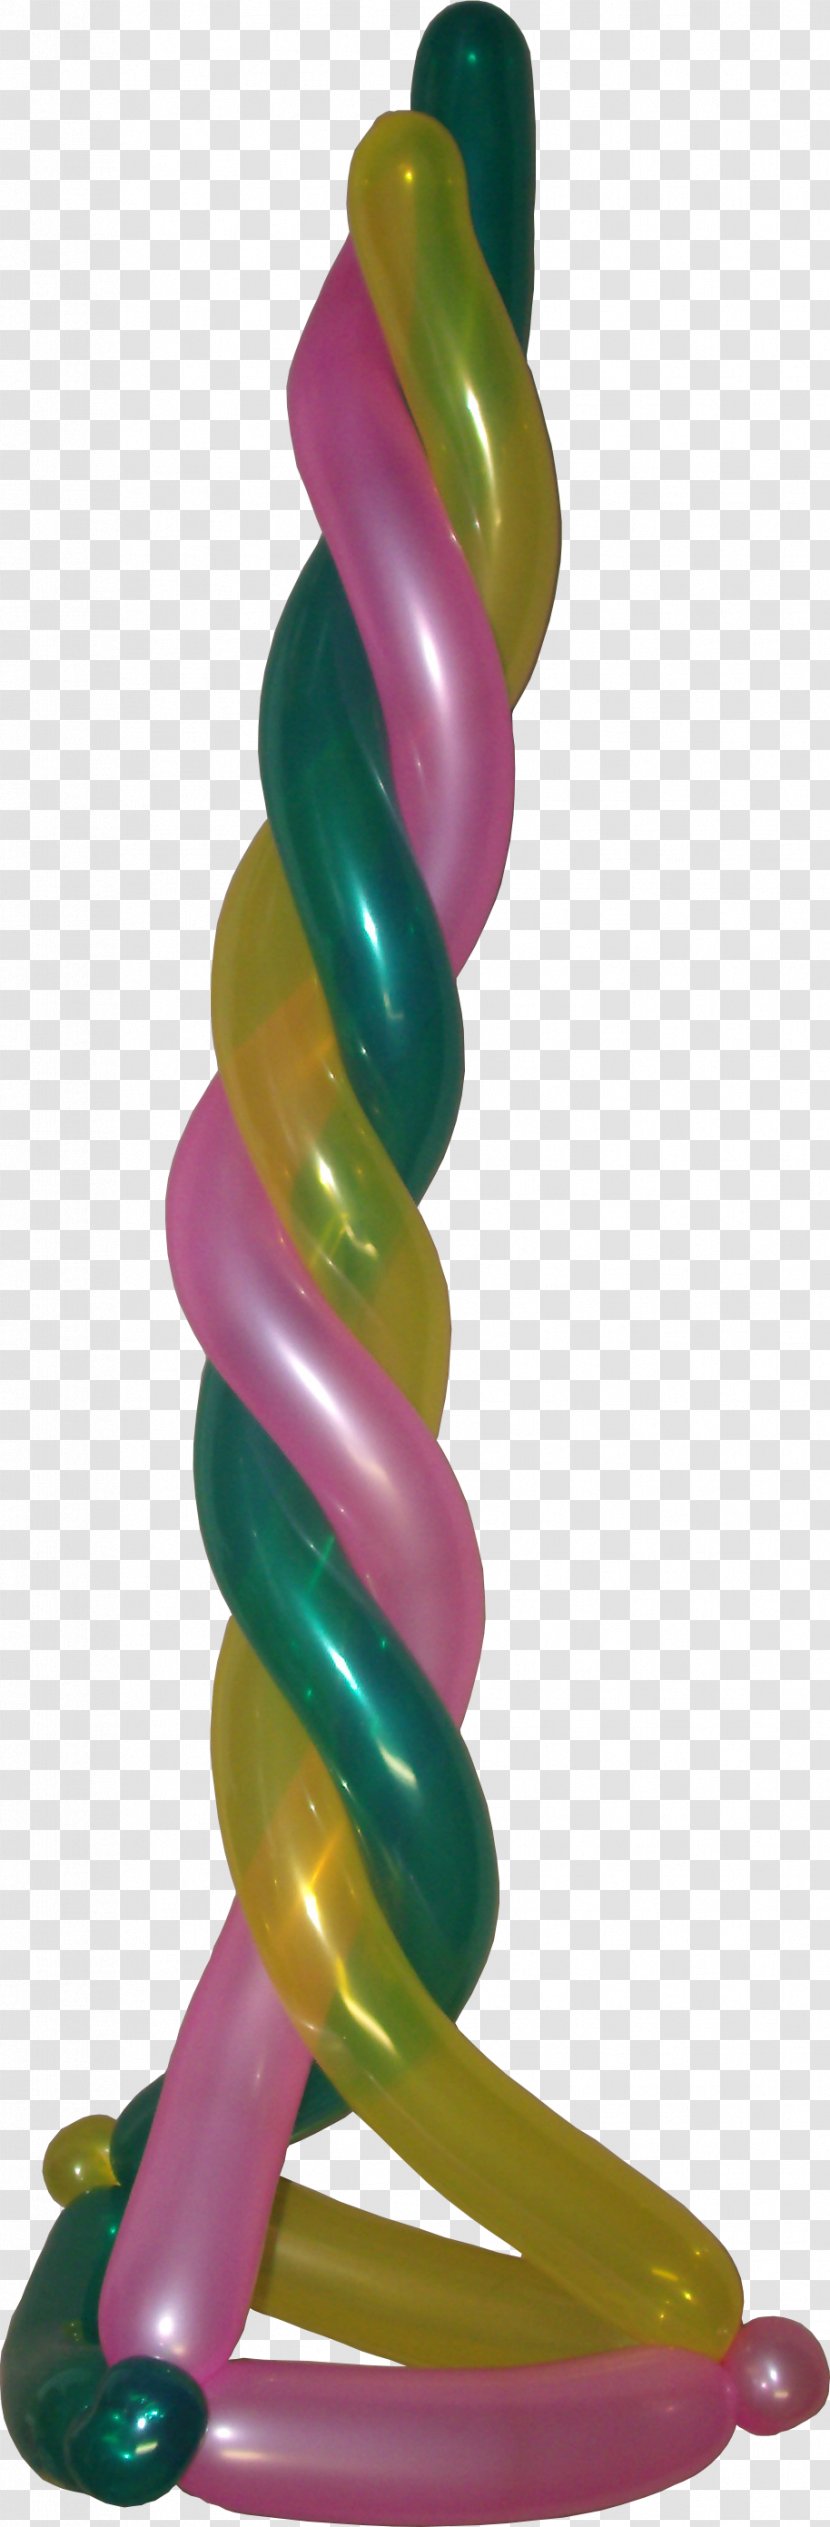 Balloon Modelling Toy Hat Trolls Transparent PNG